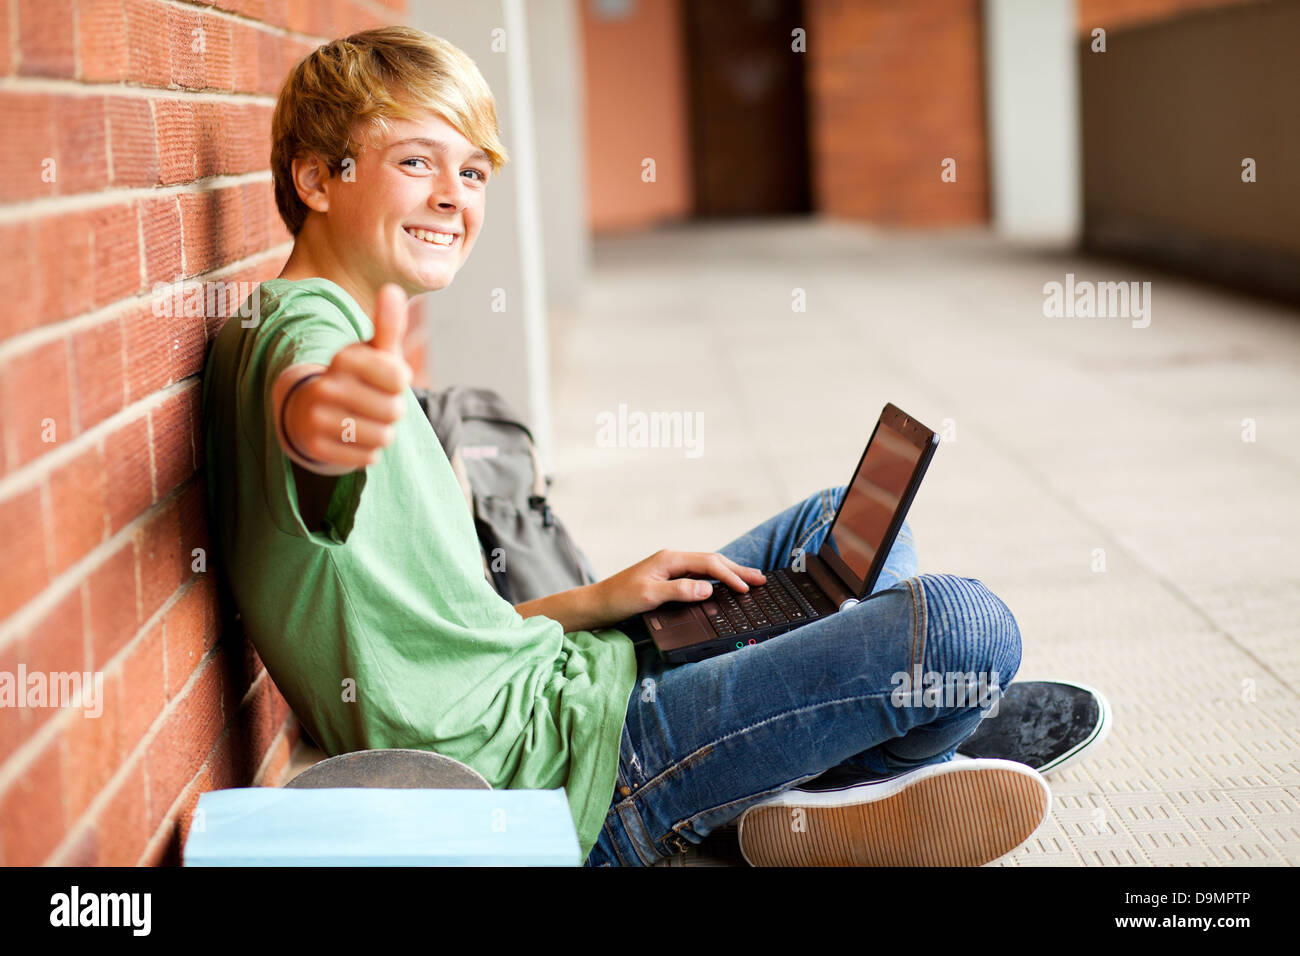 teenage student giving thumb up while using laptop Stock Photo